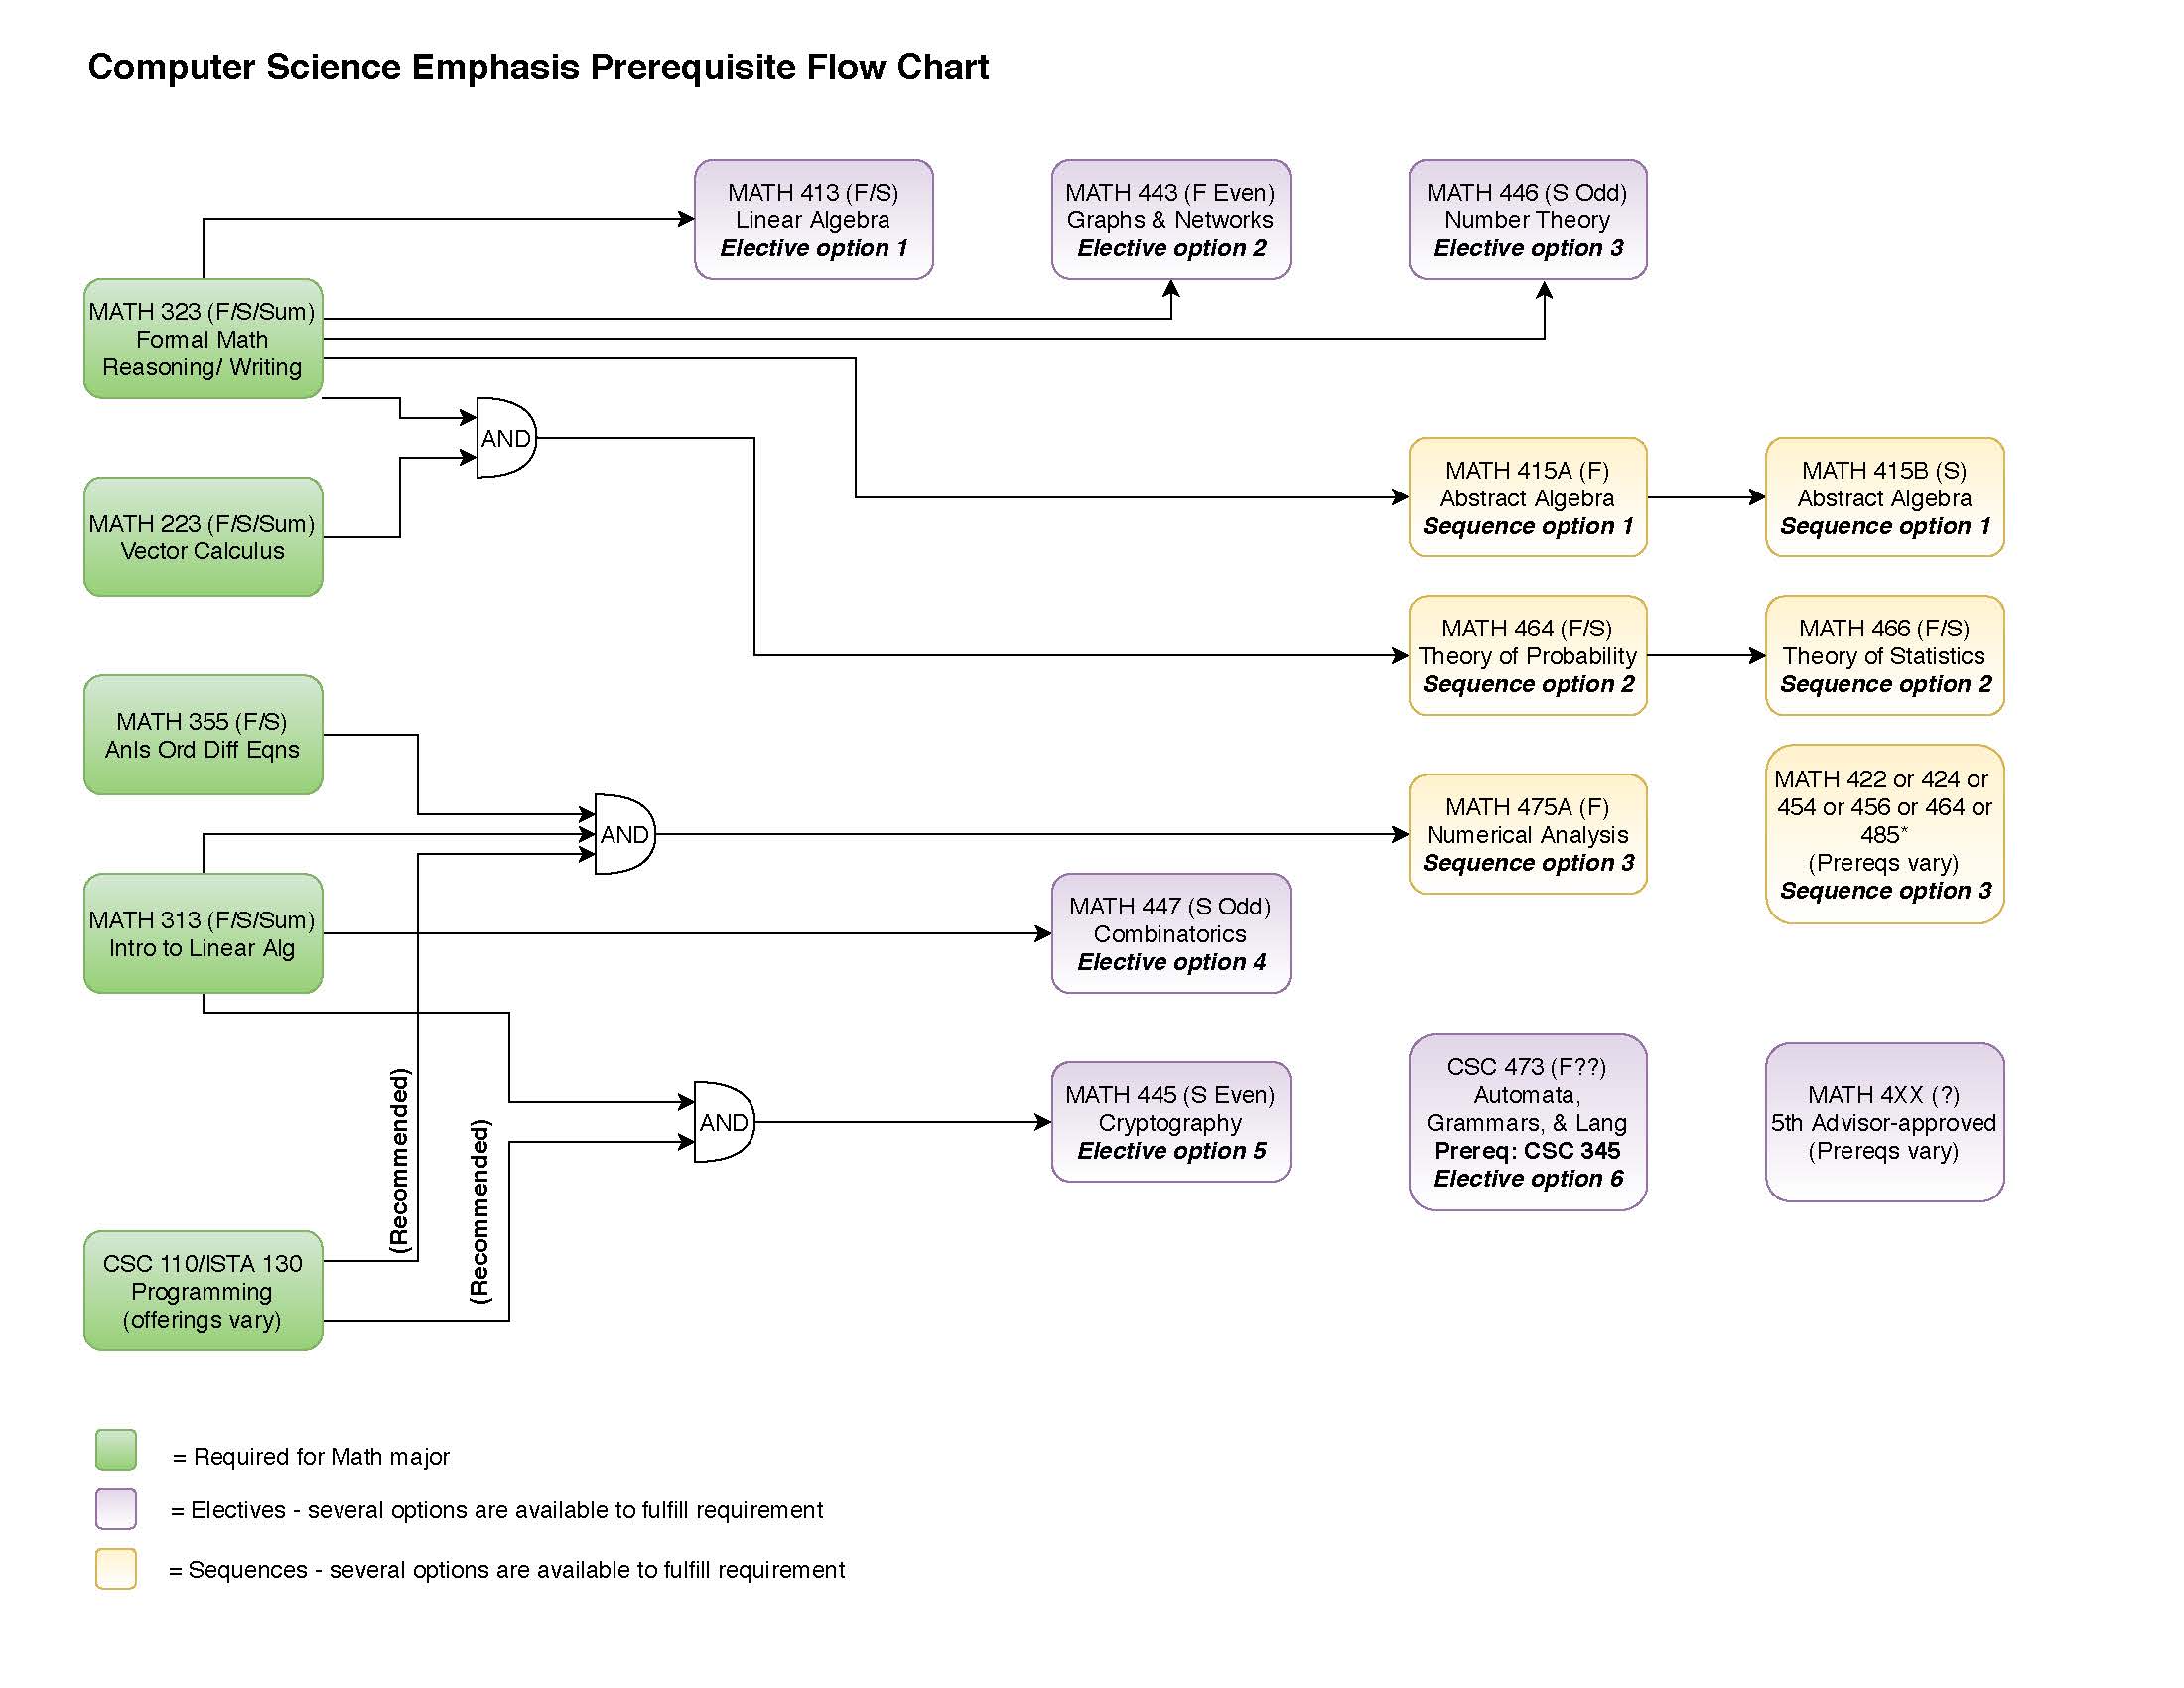 prerequisite flowchart for computer science emphasis (click image for downloadable PDF)